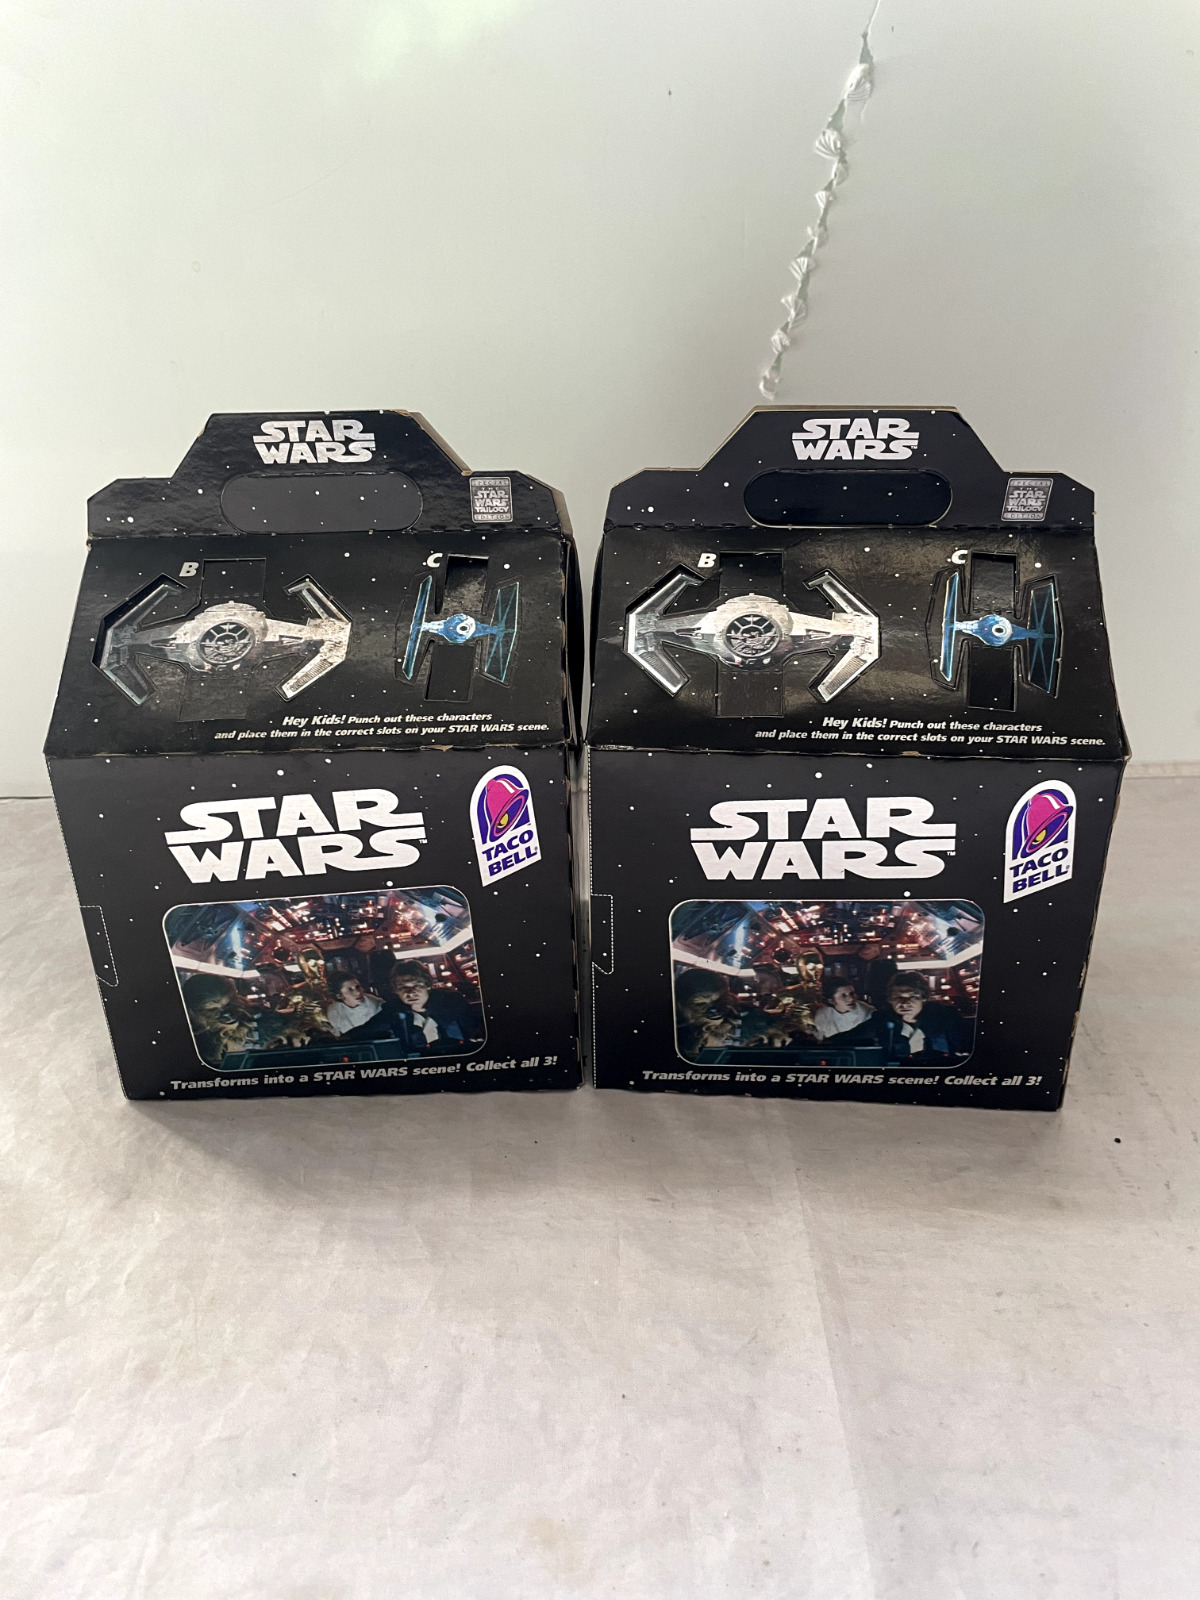 Two Star Wars 1996 Taco Bell Kids Meal Box Trilogy Special Edition - Unpunched